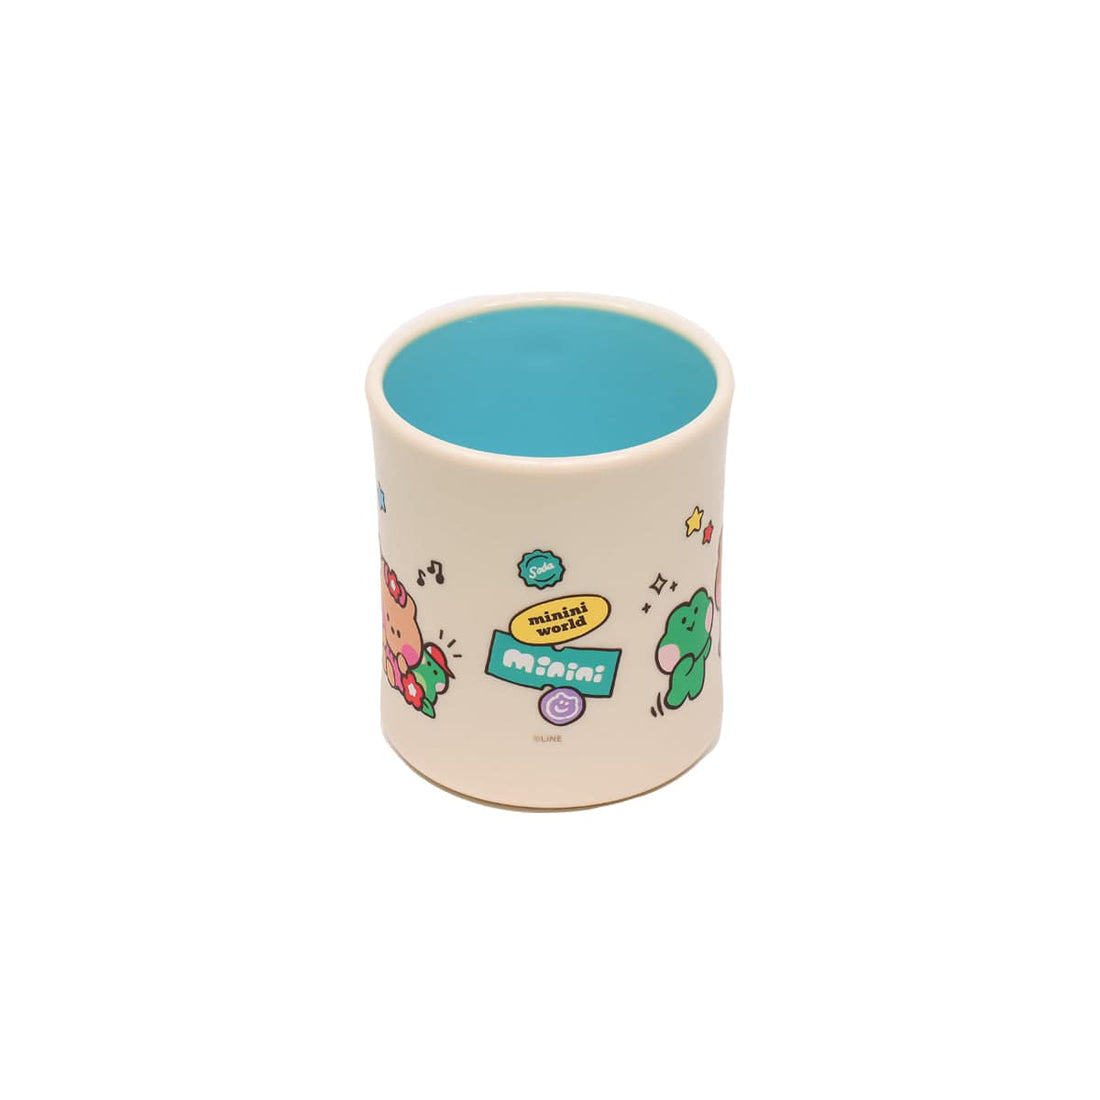 LF LIVING DOUBLE COLORED MUG CUP LINE FRIENDS minini DOUBLE COLORED MUG CUP